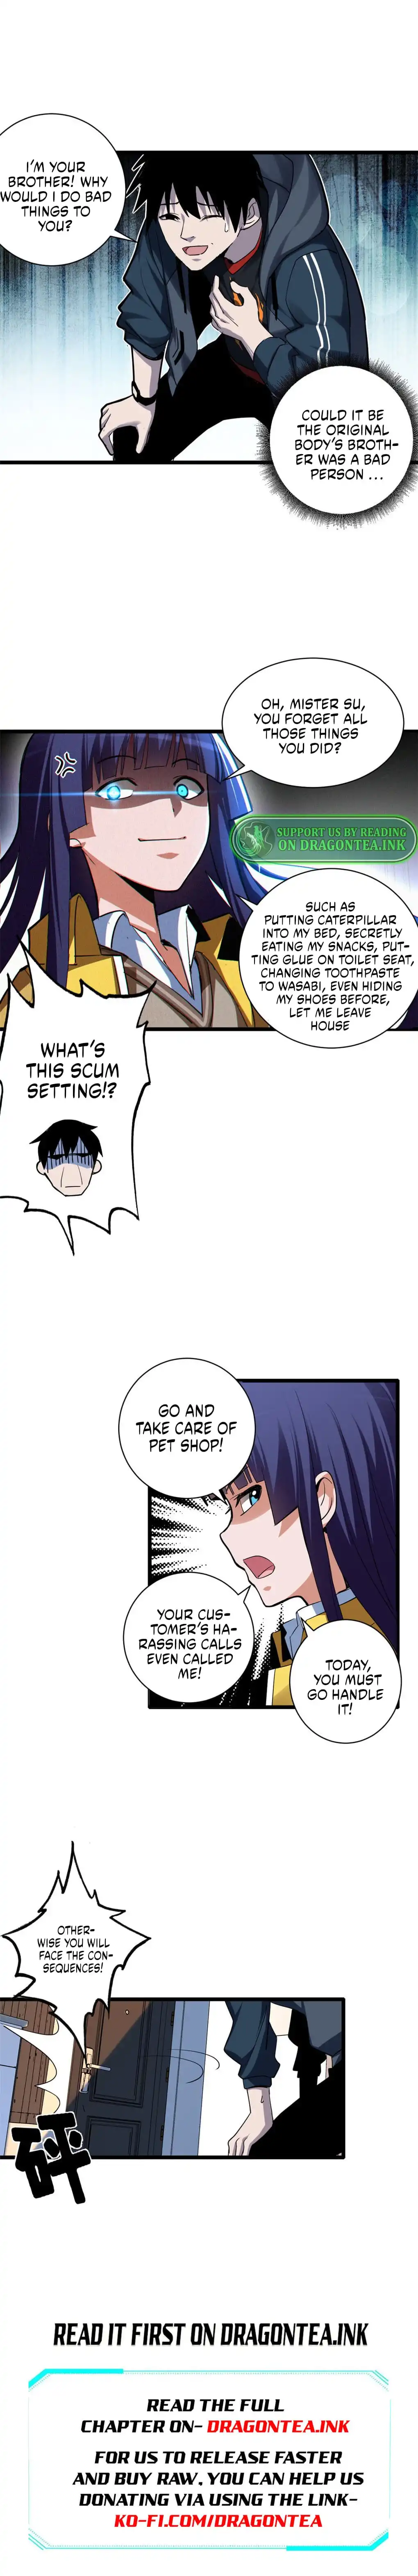 Astral Pet Store Chapter 1